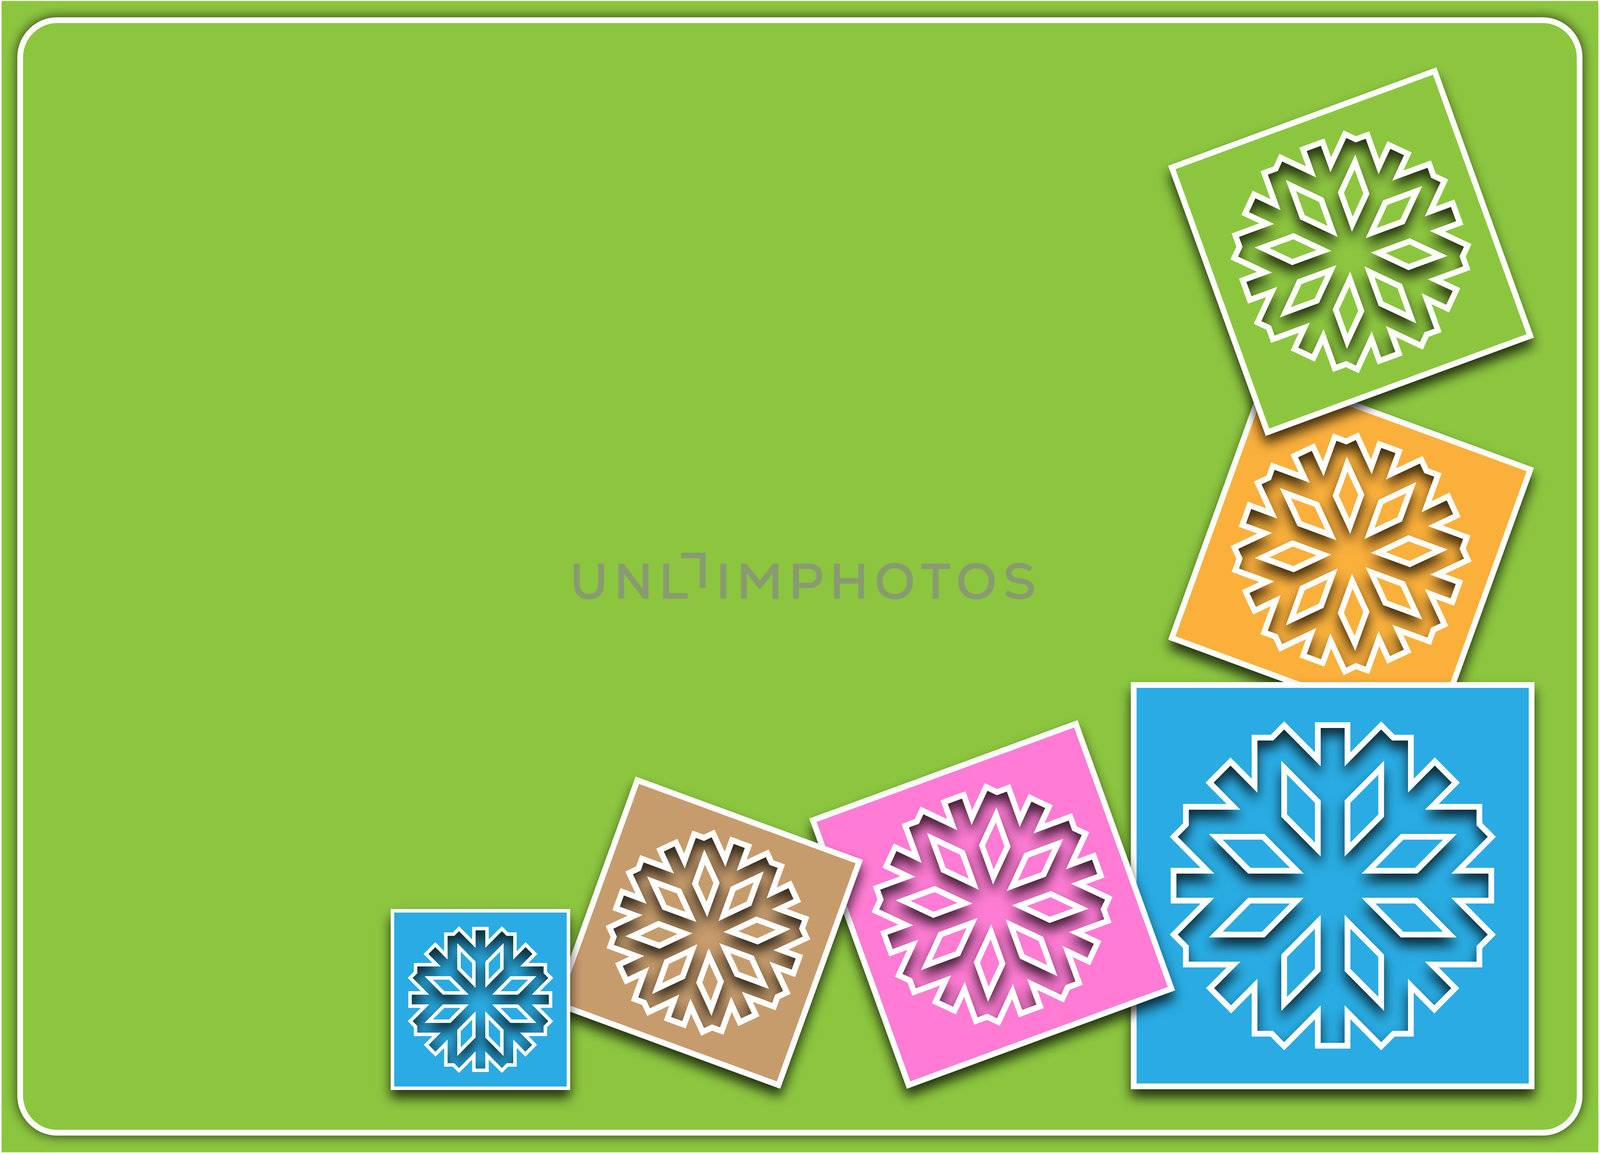 Christmas or winter background with snowflakes in pastel colors